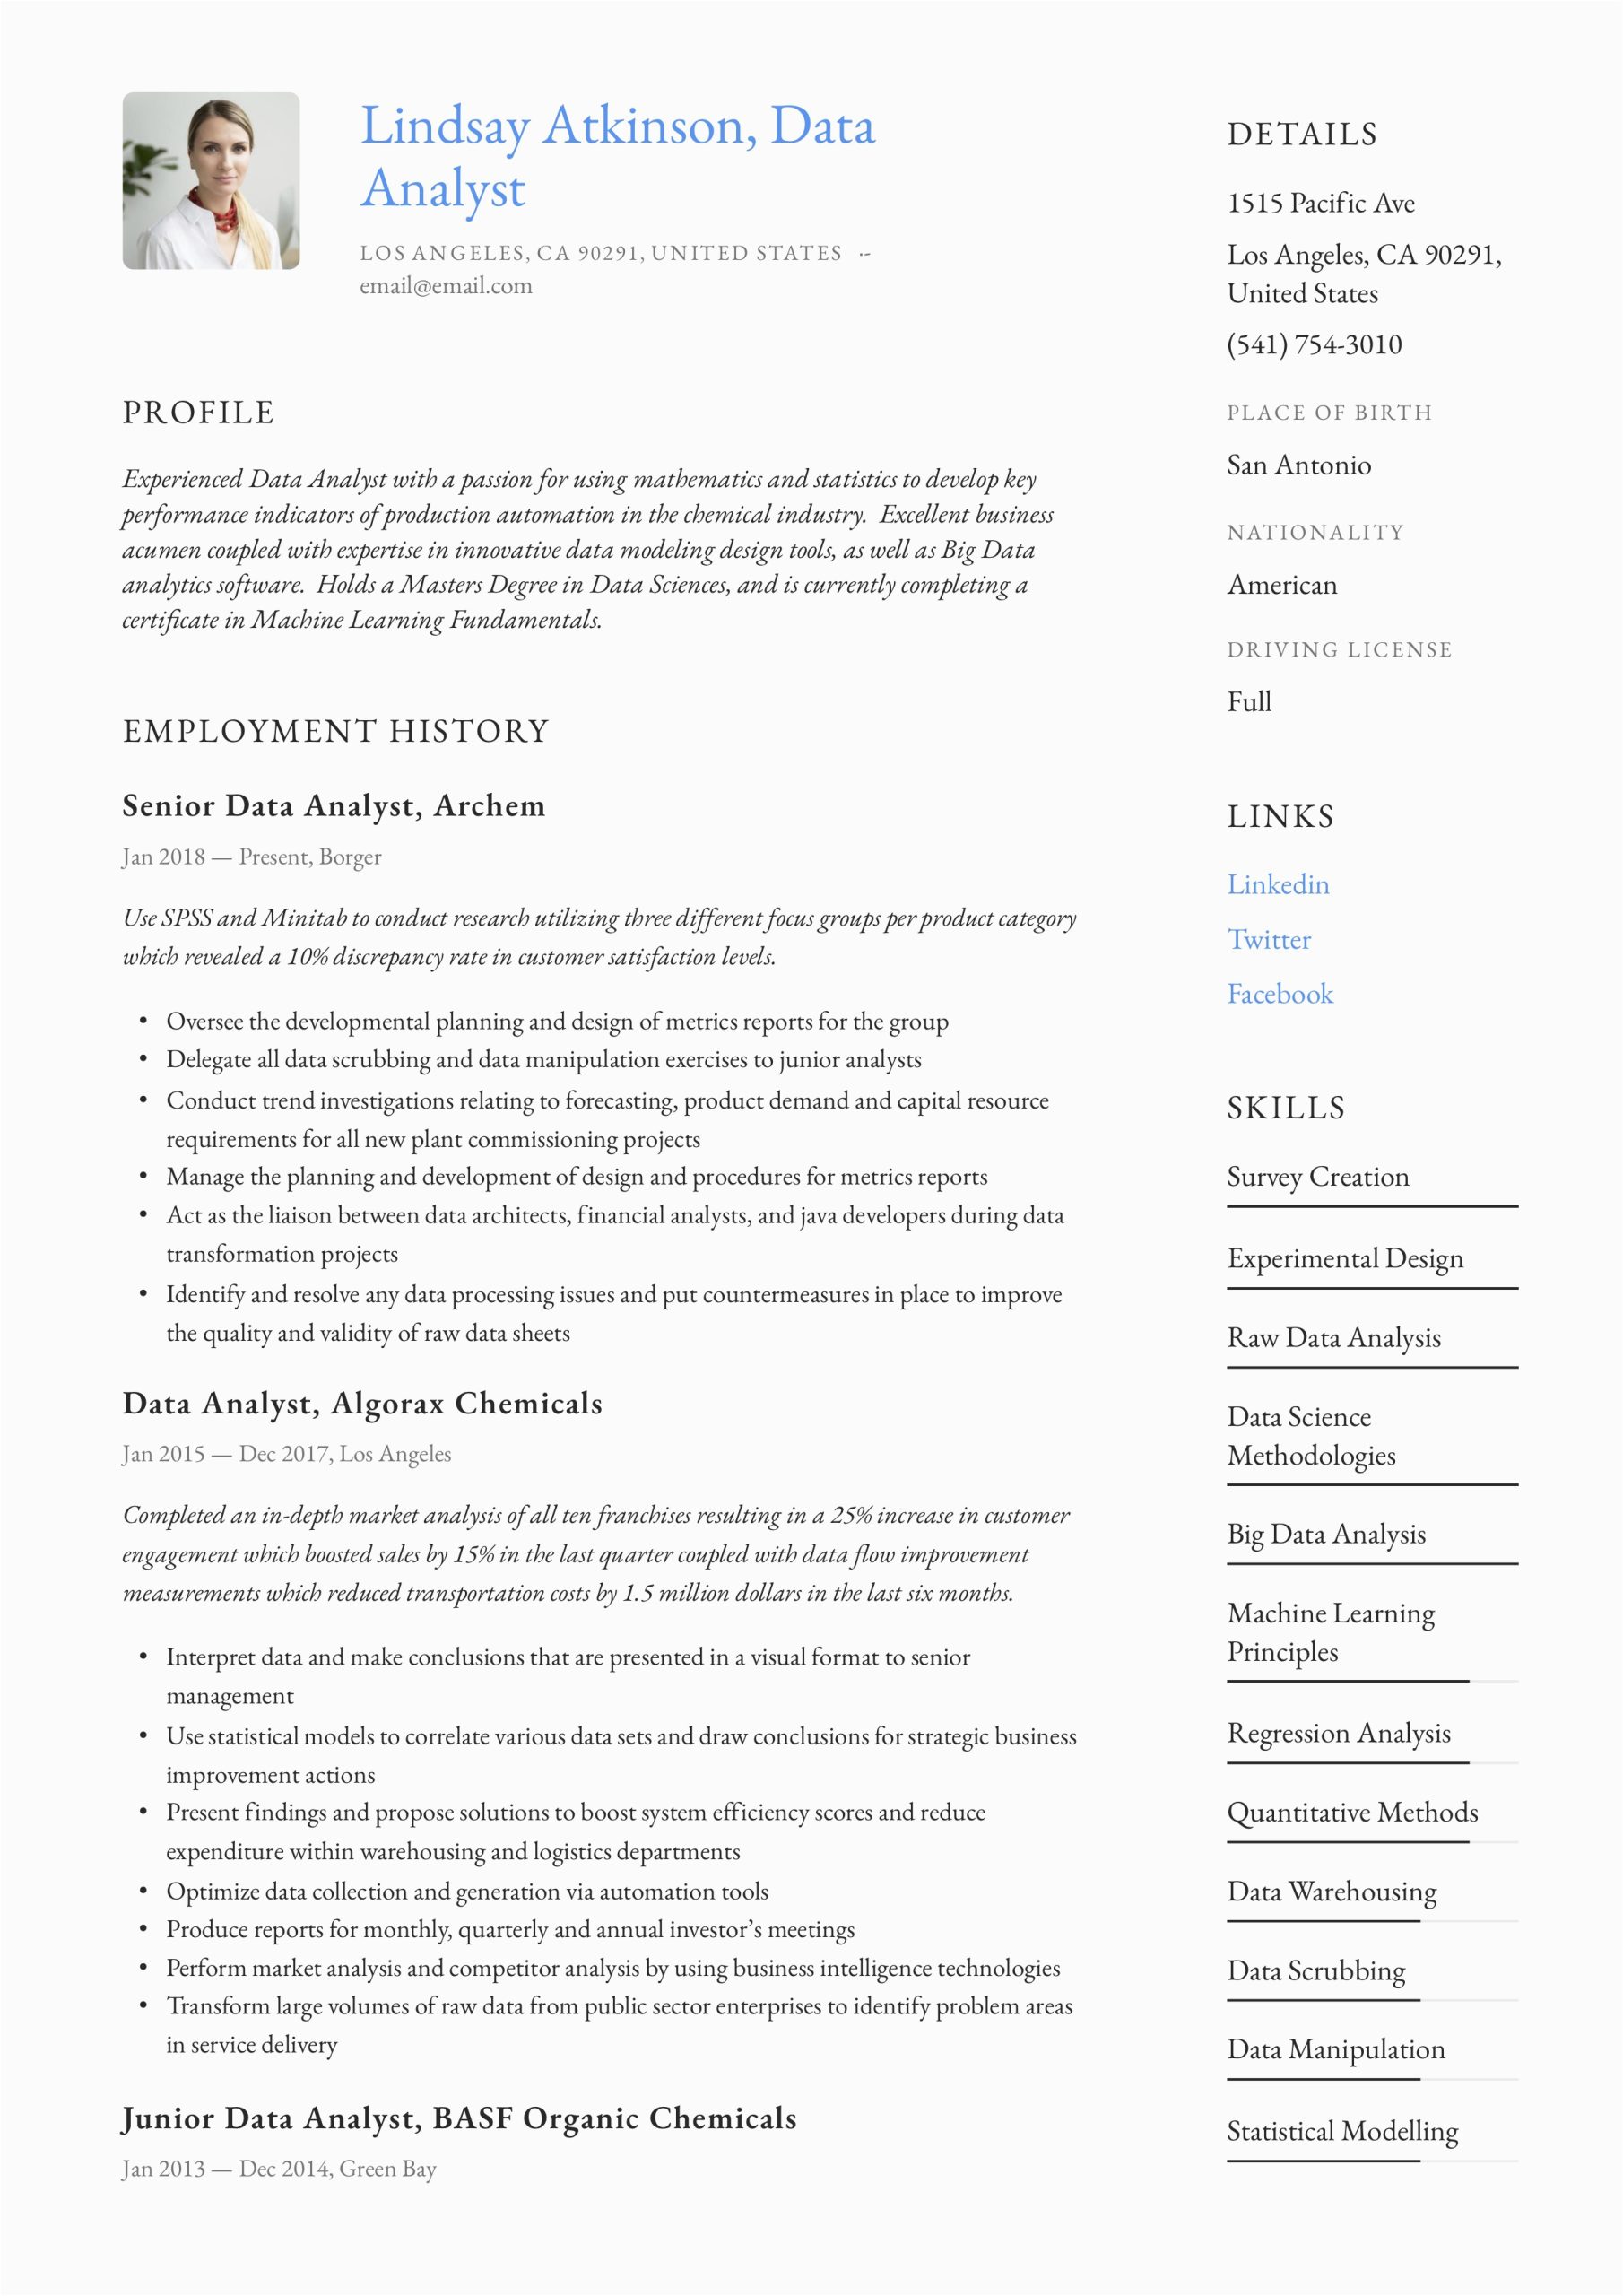 Data Analyst Job Description Samples for Resume Data Analyst Resume & Writing Guide 19 Examples